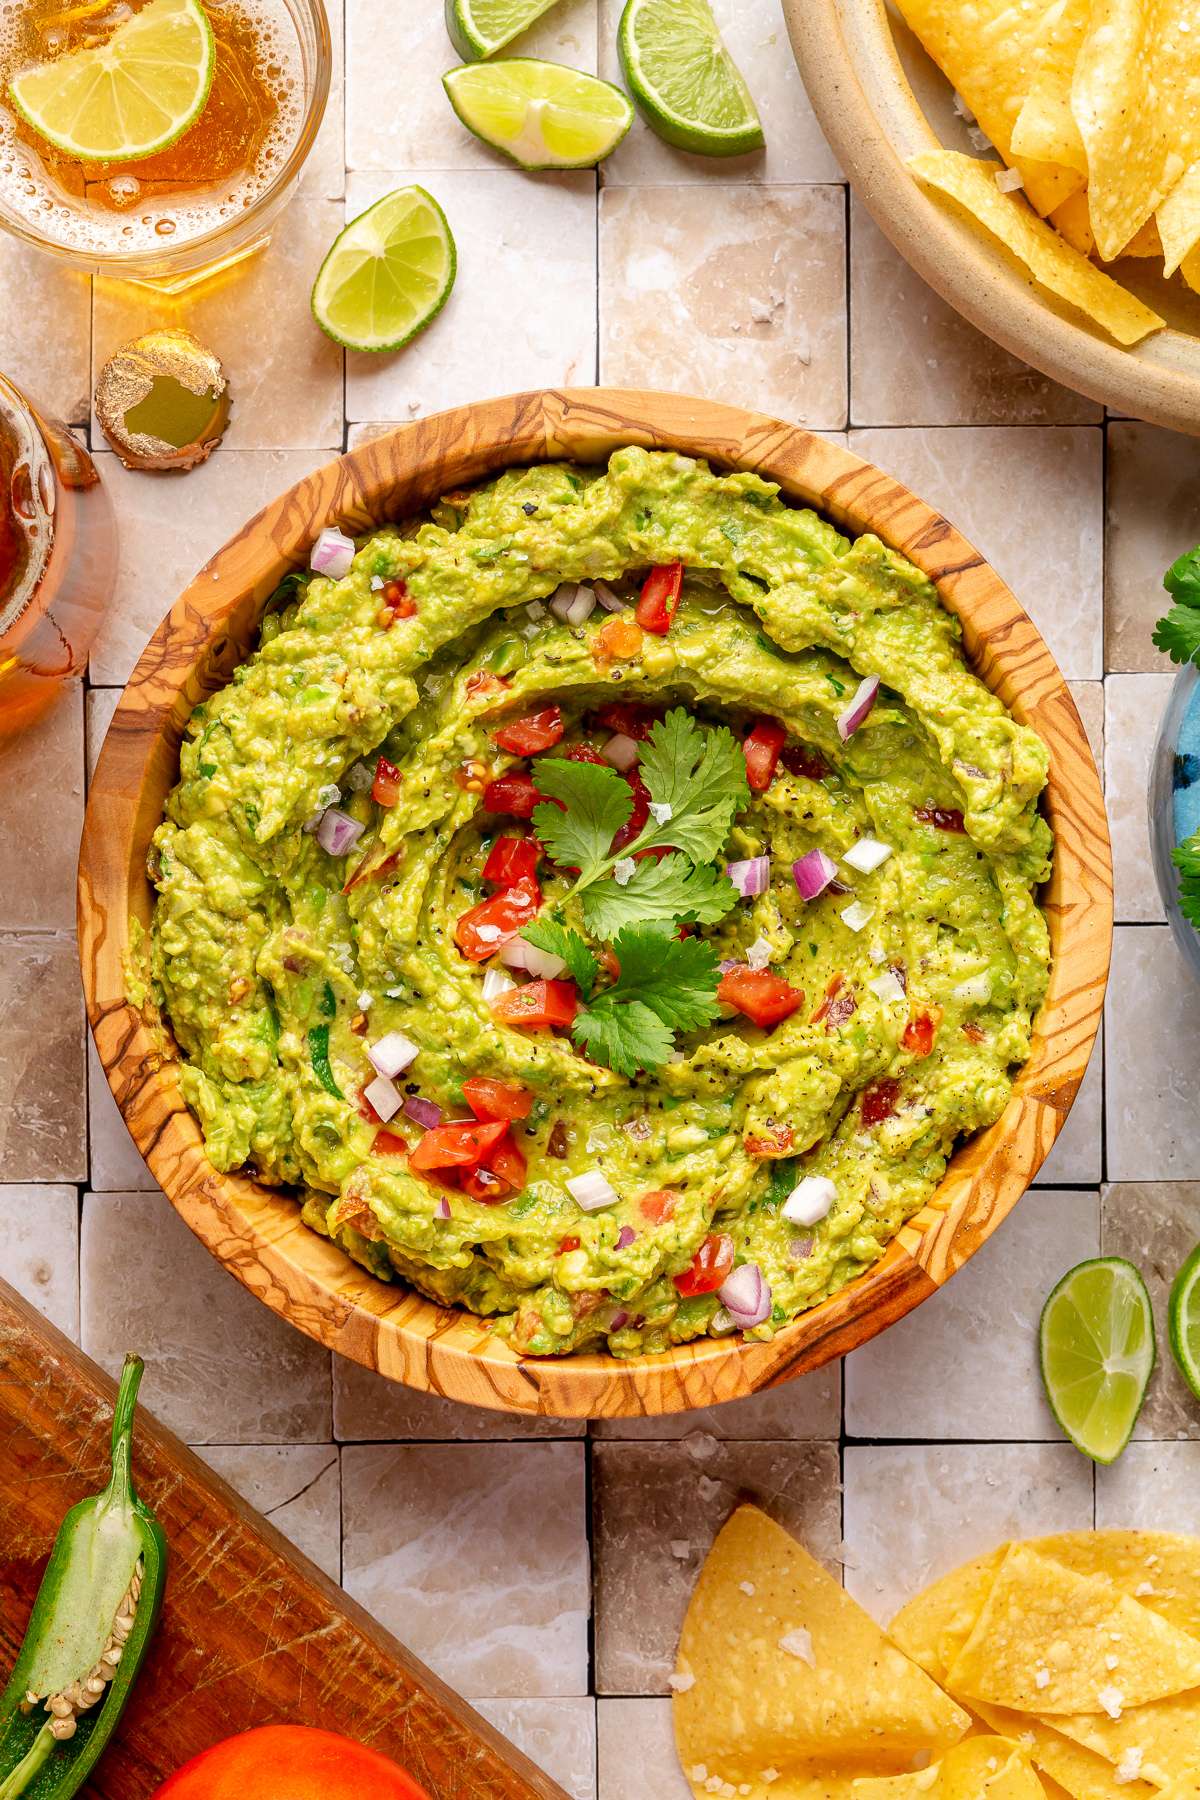 Bowl of guacamole garnished with fresh cilantro, diced tomato and onion.